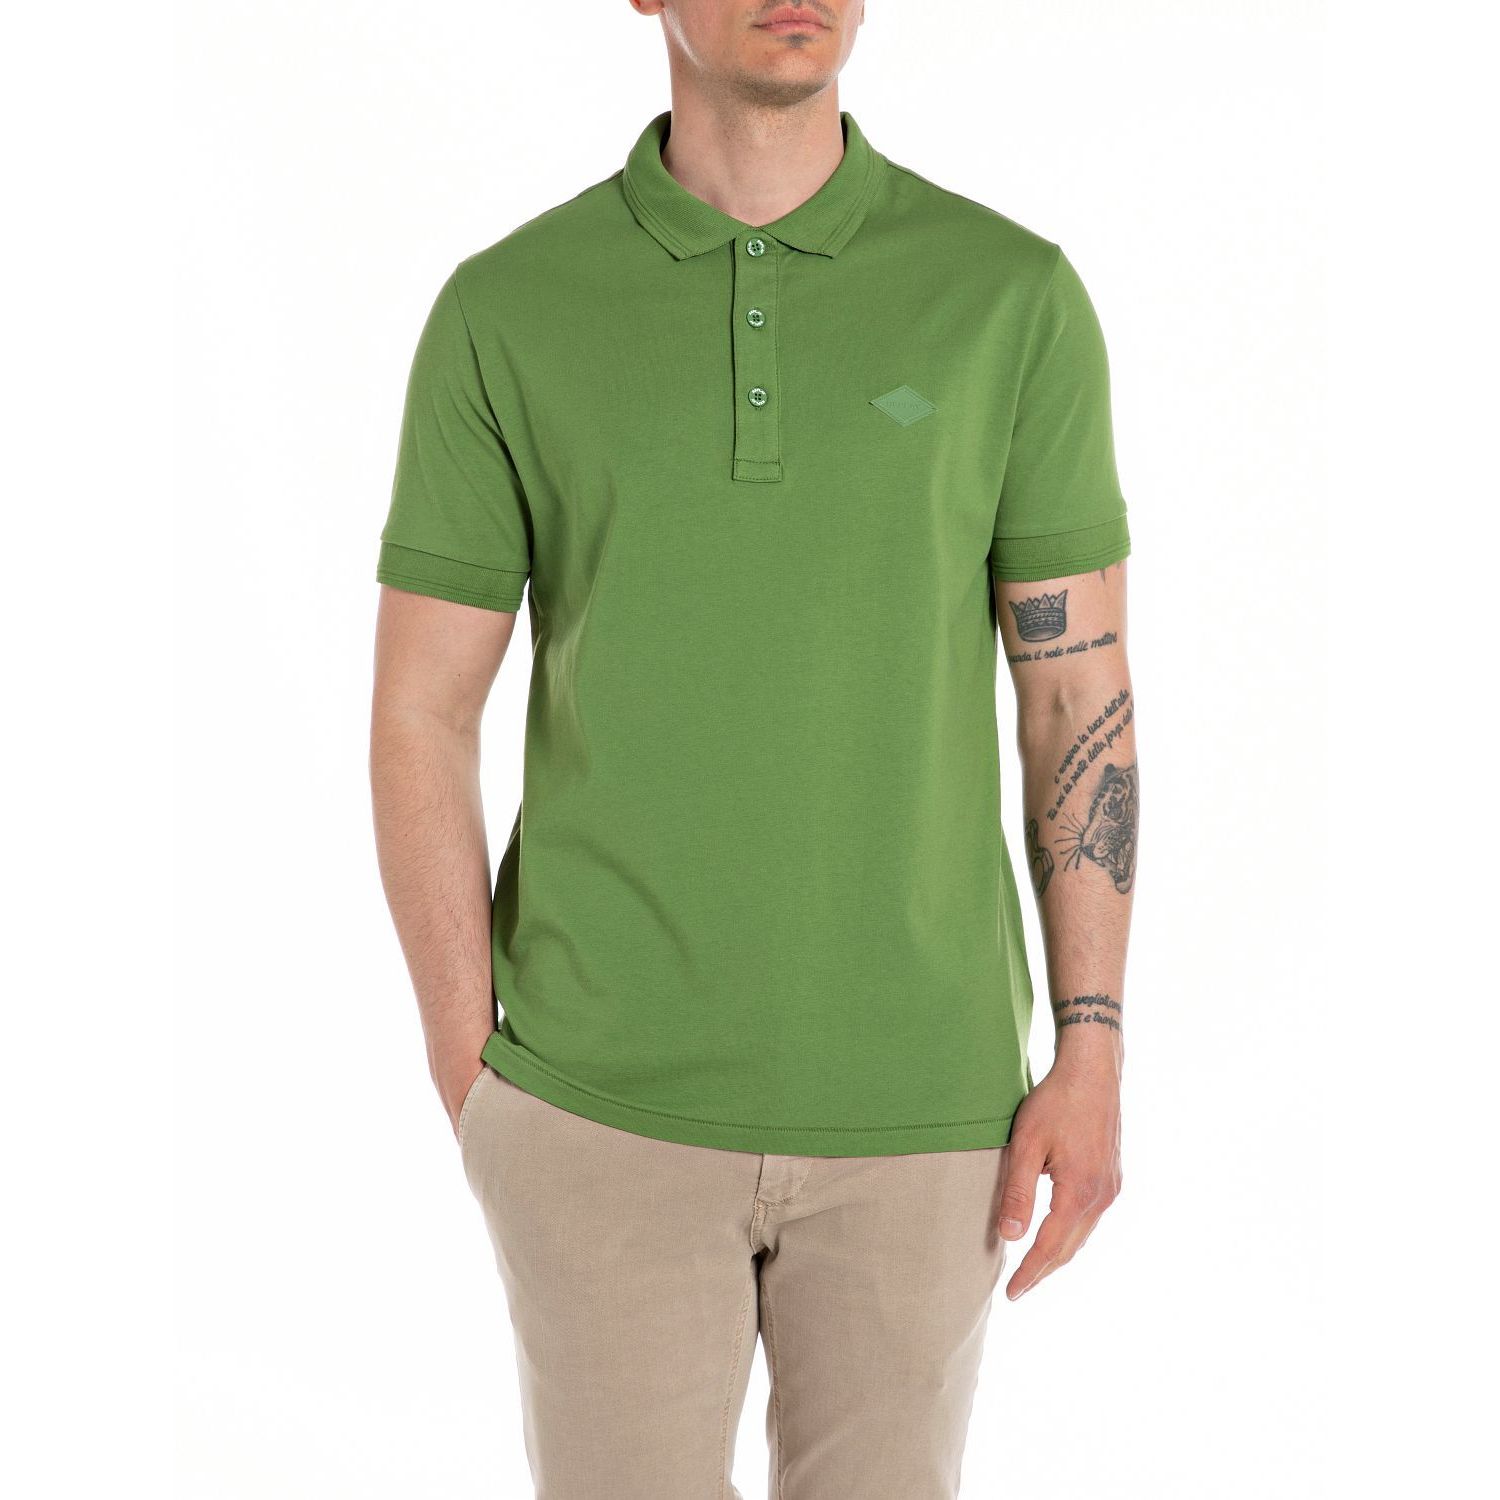 Replay M6548 polo combat green